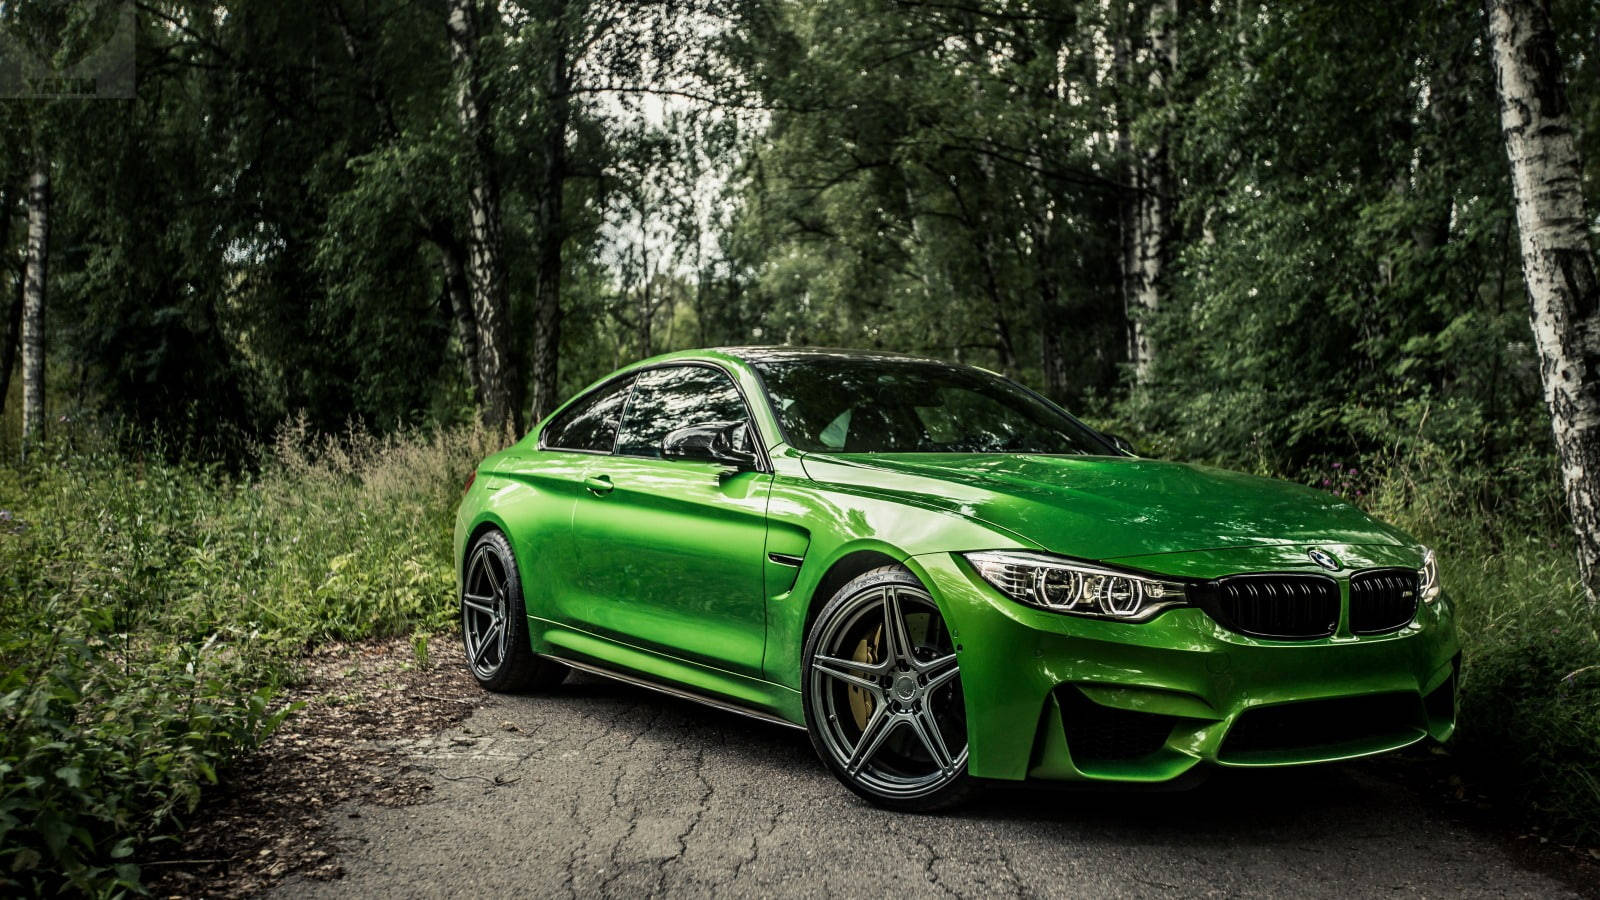 Caption: Majestic Green Bmw M4 Roaring Through The Forest Wallpaper